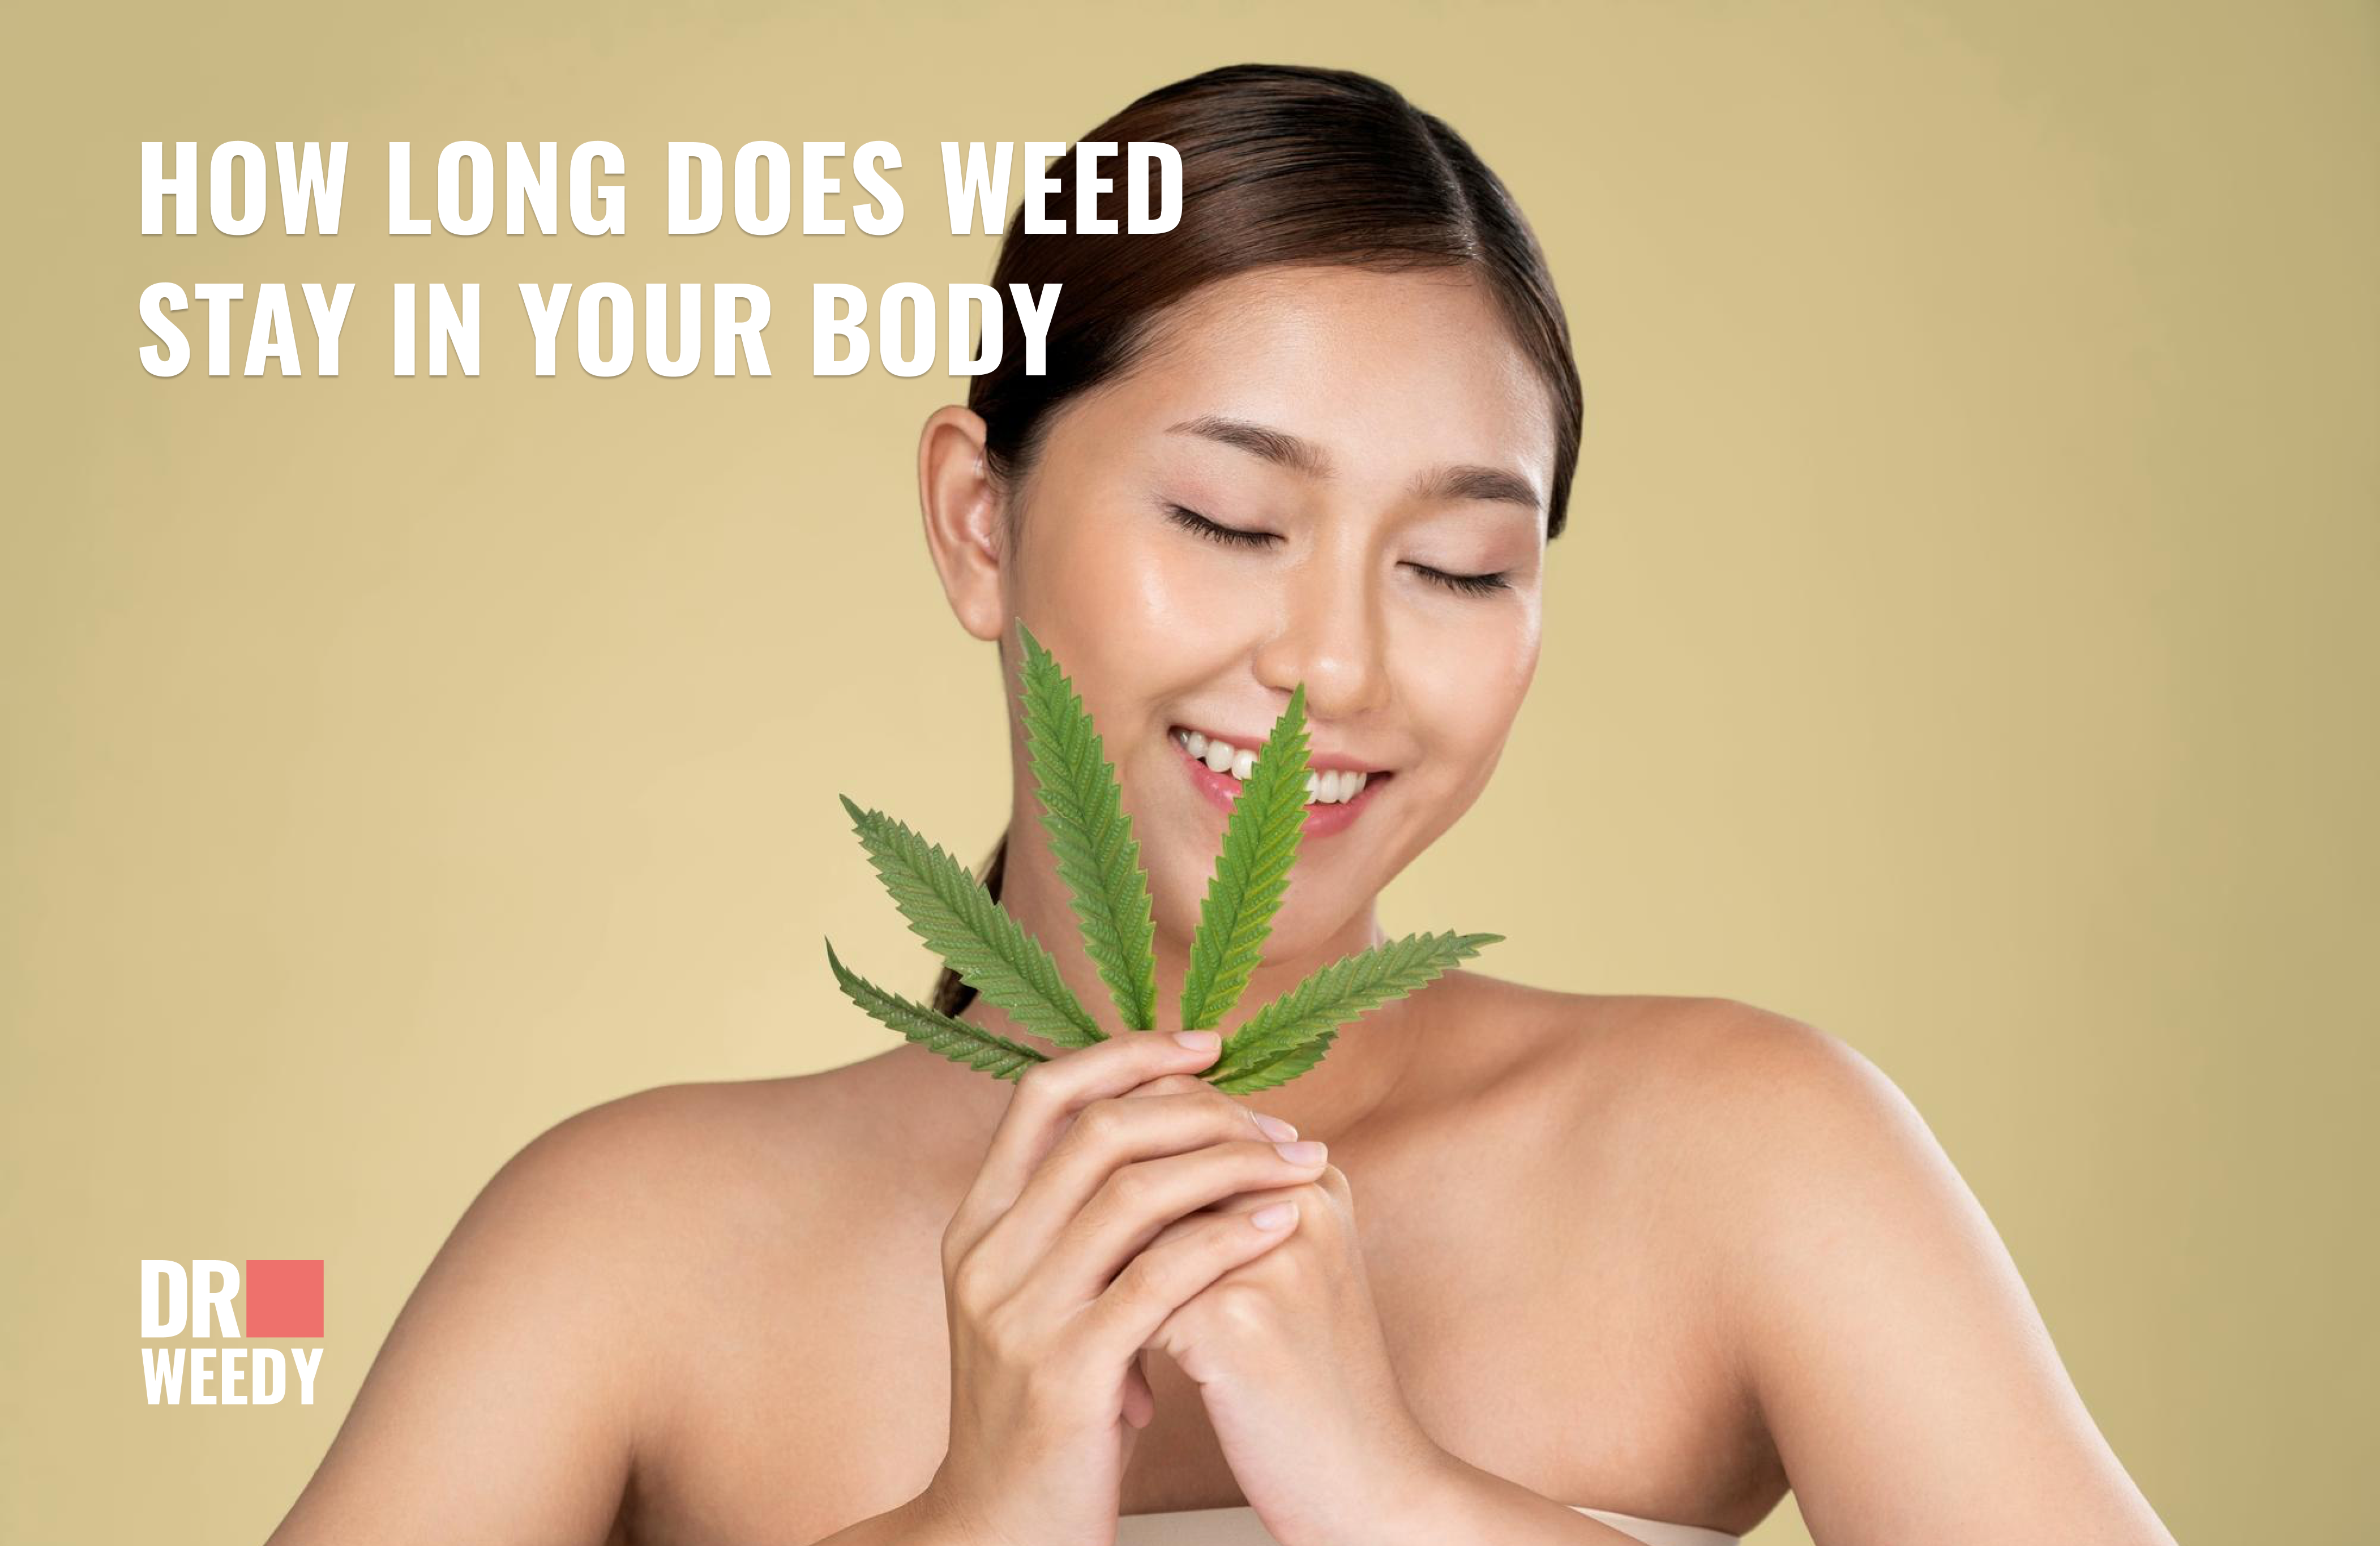 How Long Does Weed Stay in Your Body